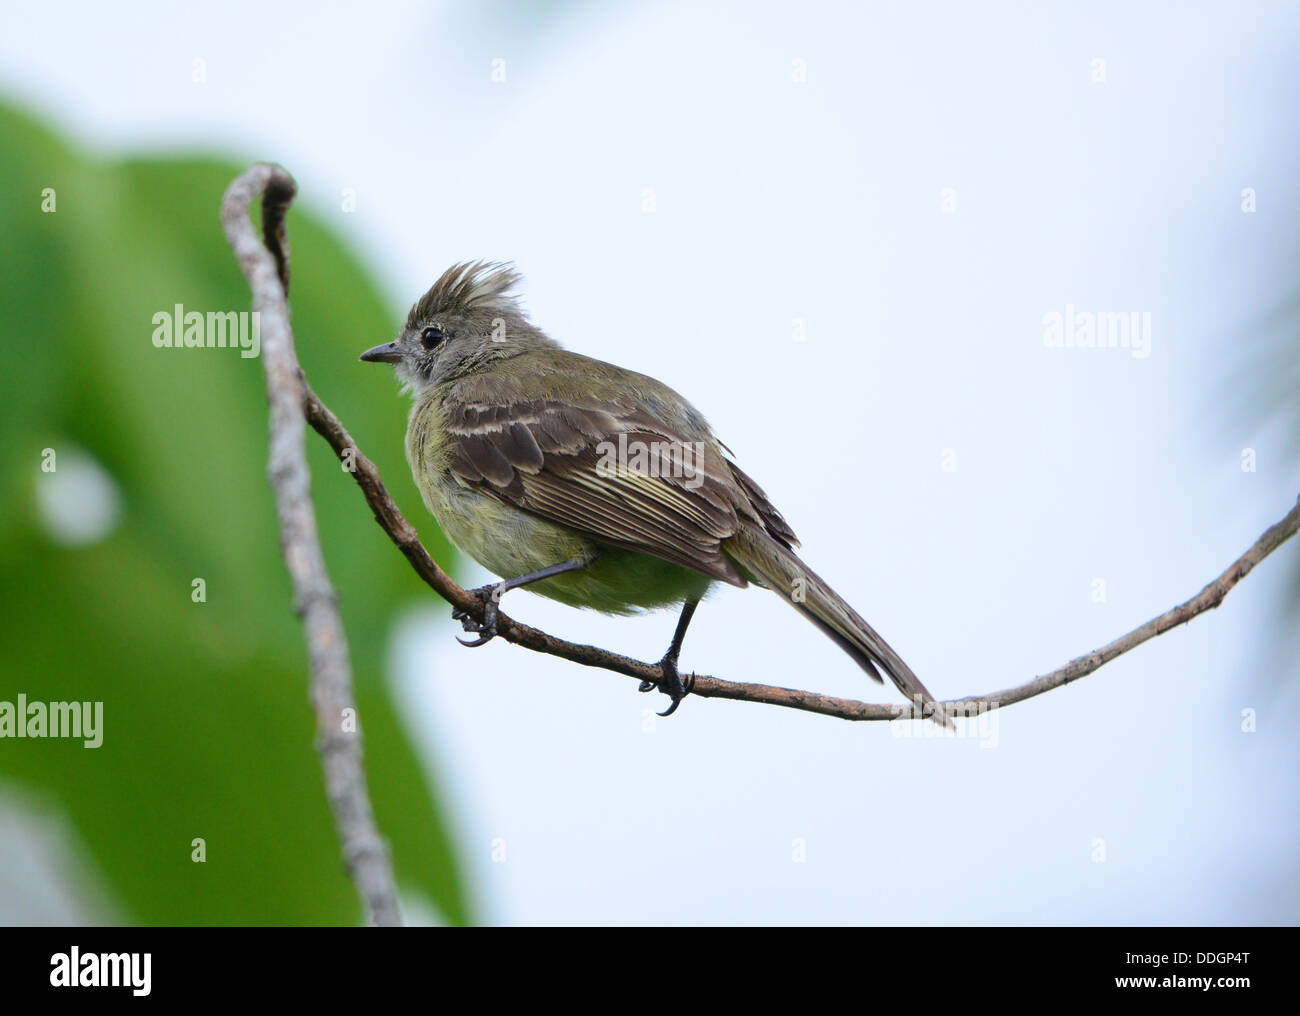 A Yellow-bellied Elaenia ( Elaenia flavogaster) perched on a tree branch Stock Photo